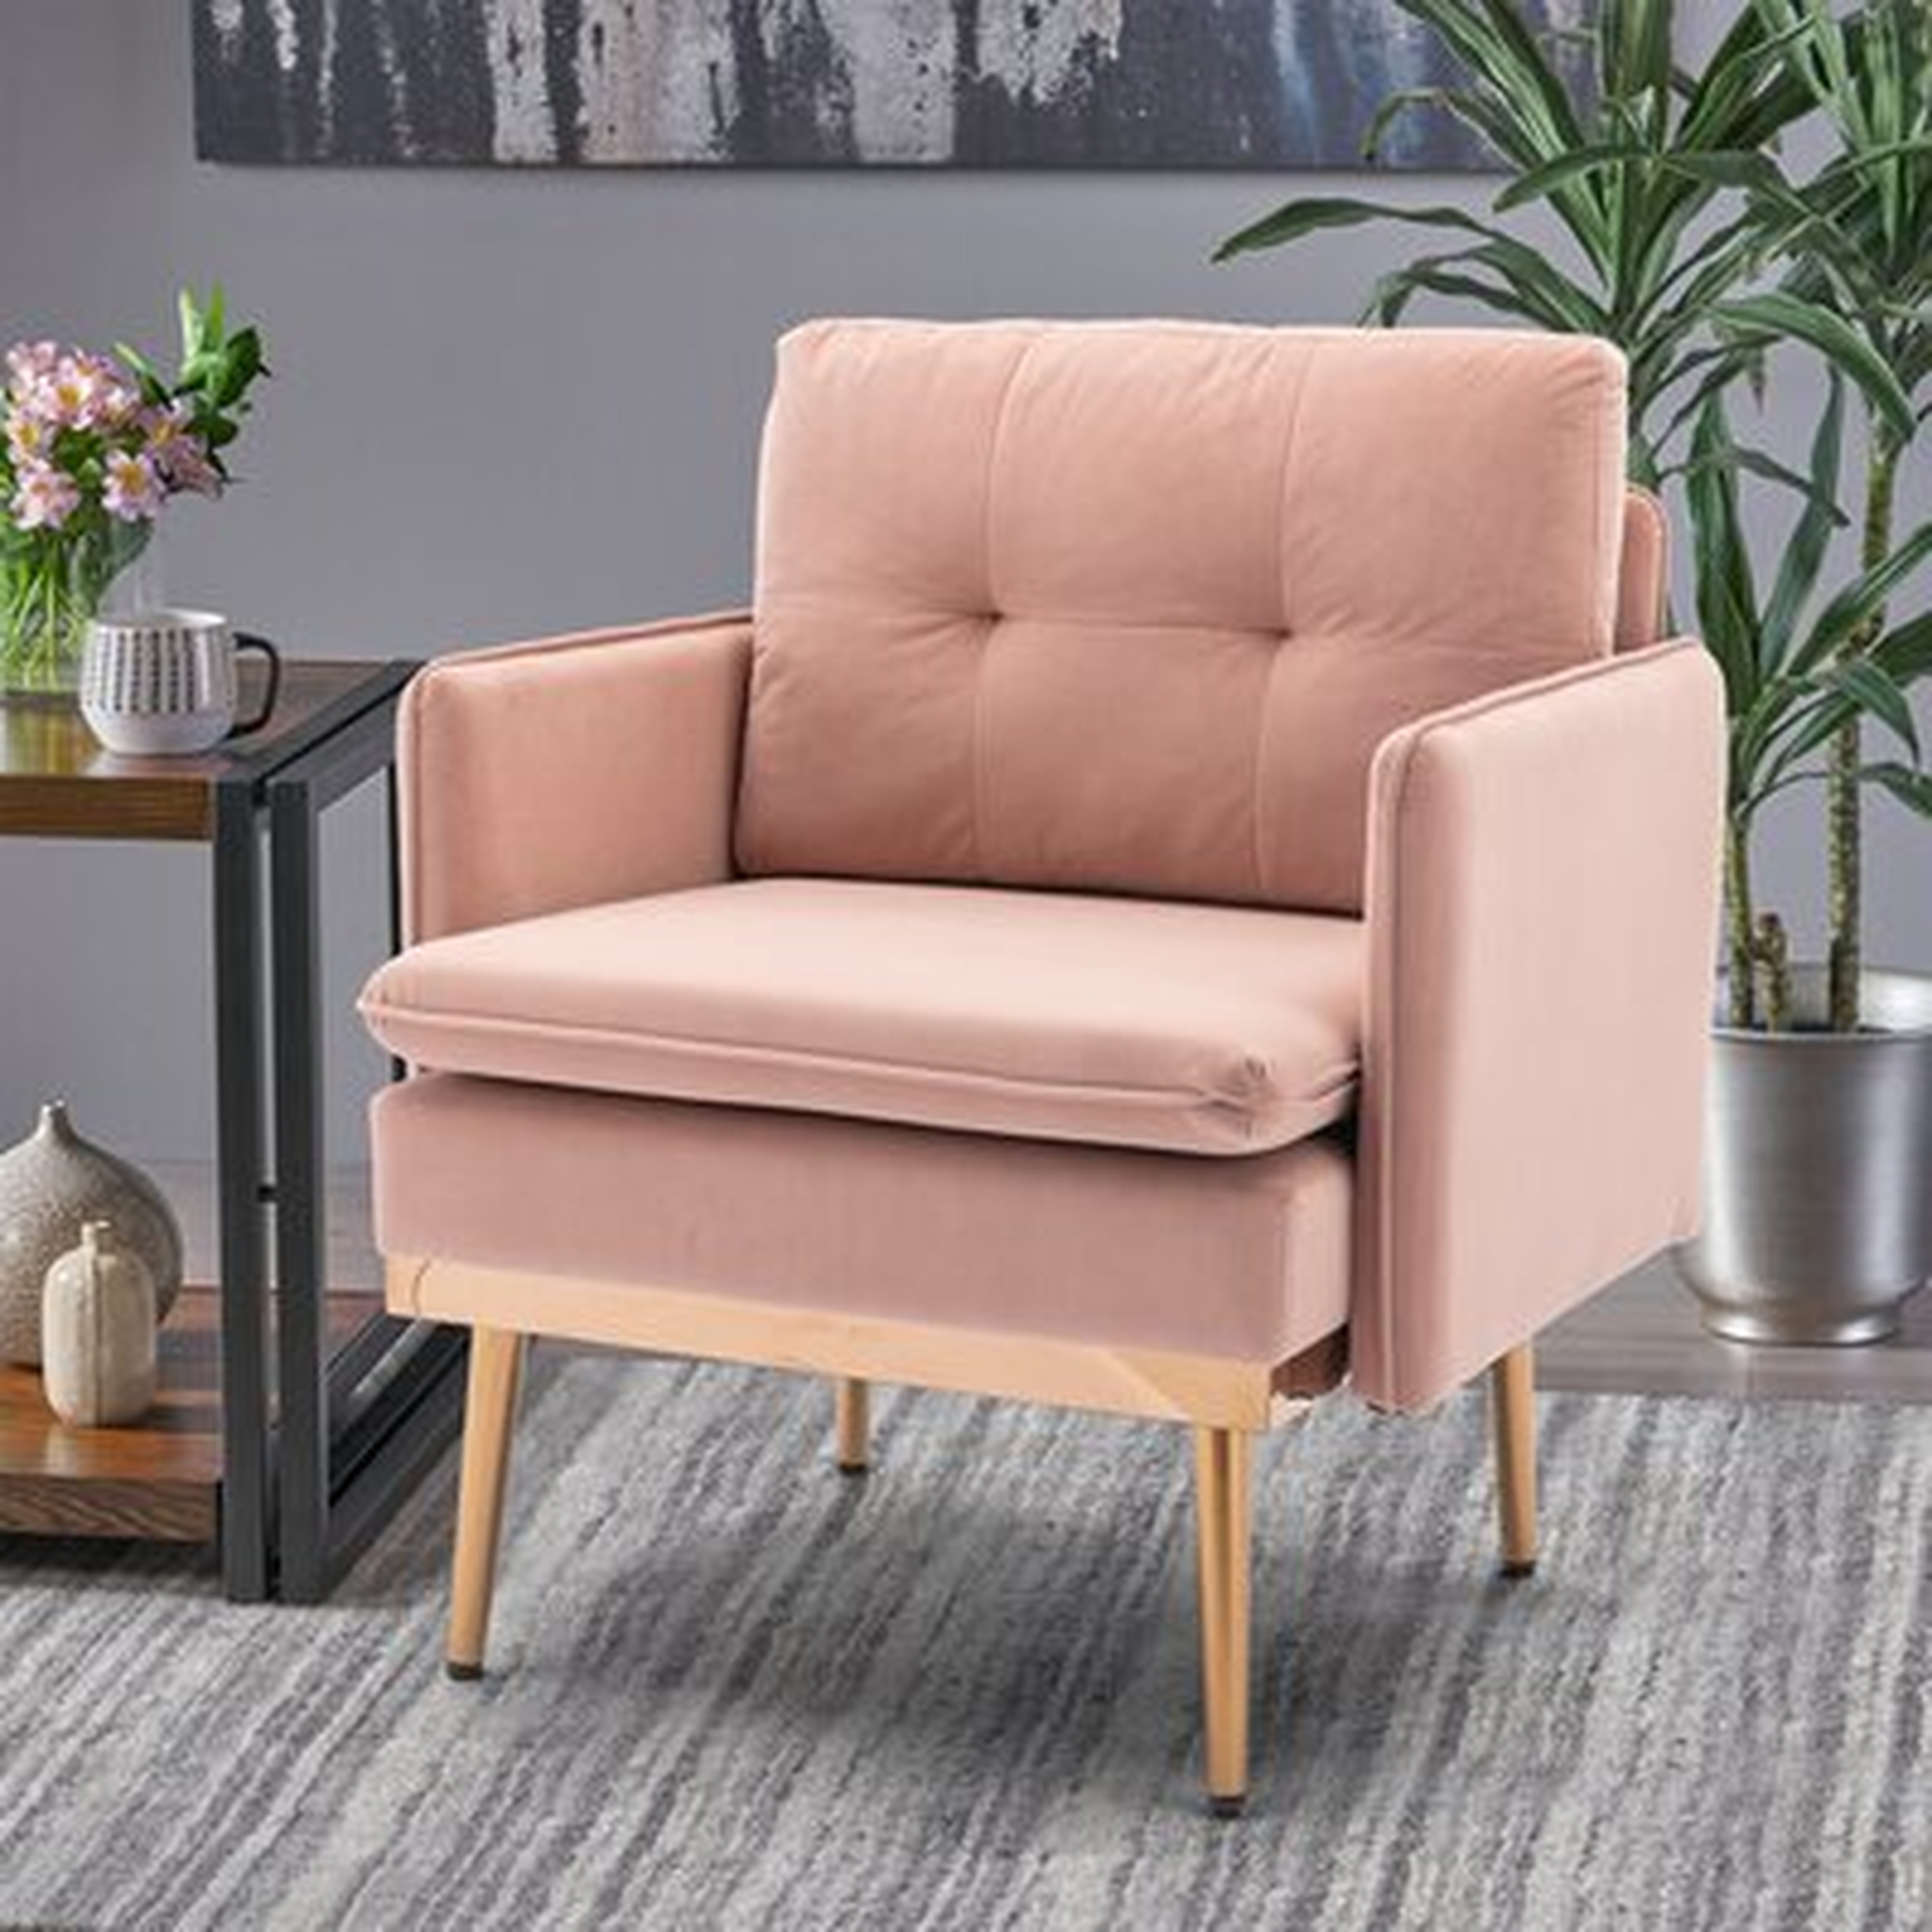 Velvet Chaise Lounge Accent Chair With Golden Legs Tufted Back - Wayfair